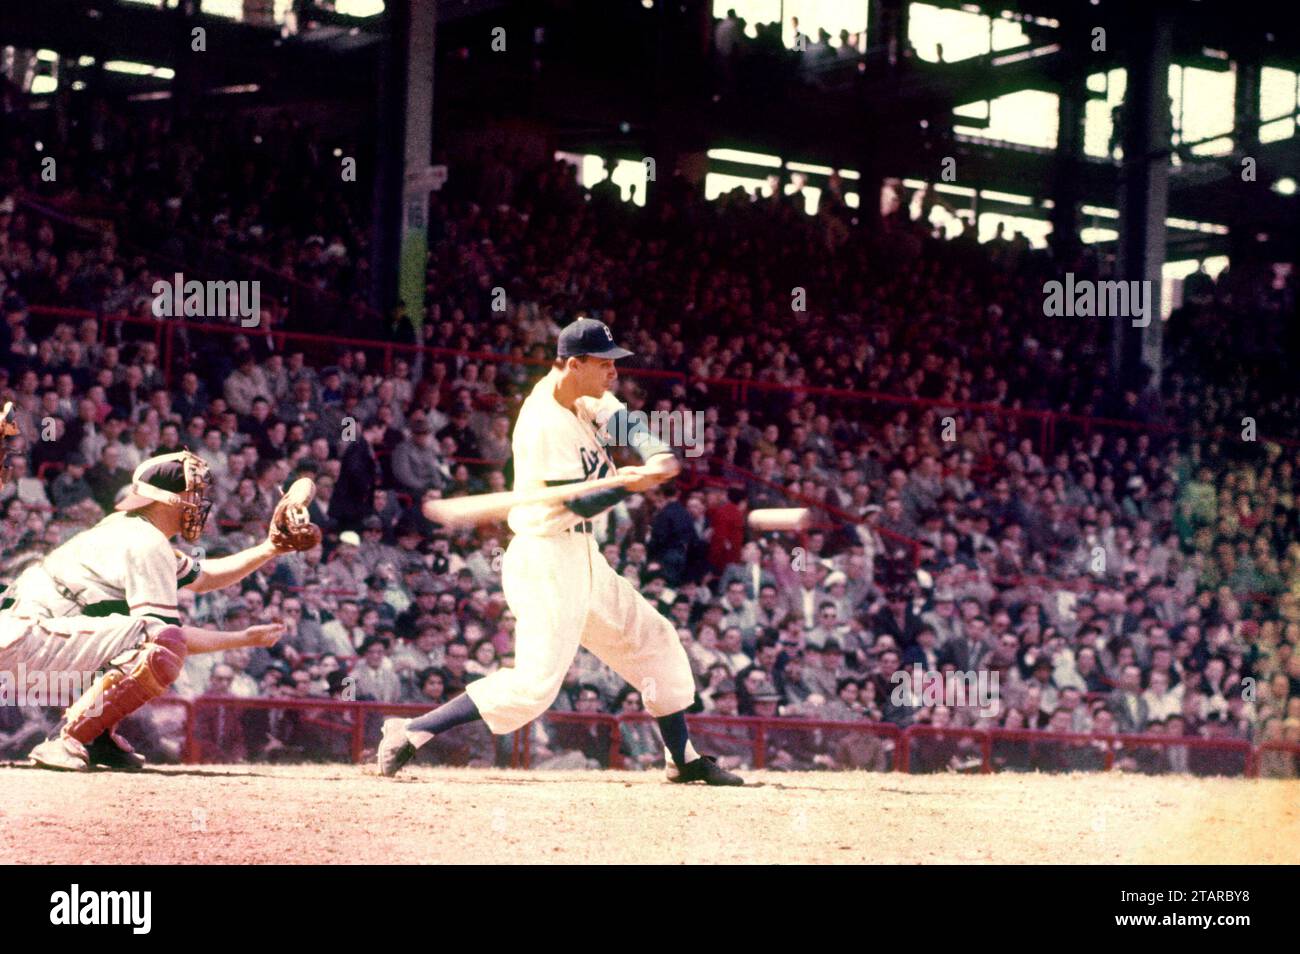 BROOKLYN, NY - 1954:  Carl Furillo #6 of the Brooklyn Dodgers swings at the pitch during an MLB game circa 1954 at Ebbets Field in Brooklyn, New York.  (Photo by Hy Peskin) *** Local Caption *** Carl Furillo Stock Photo